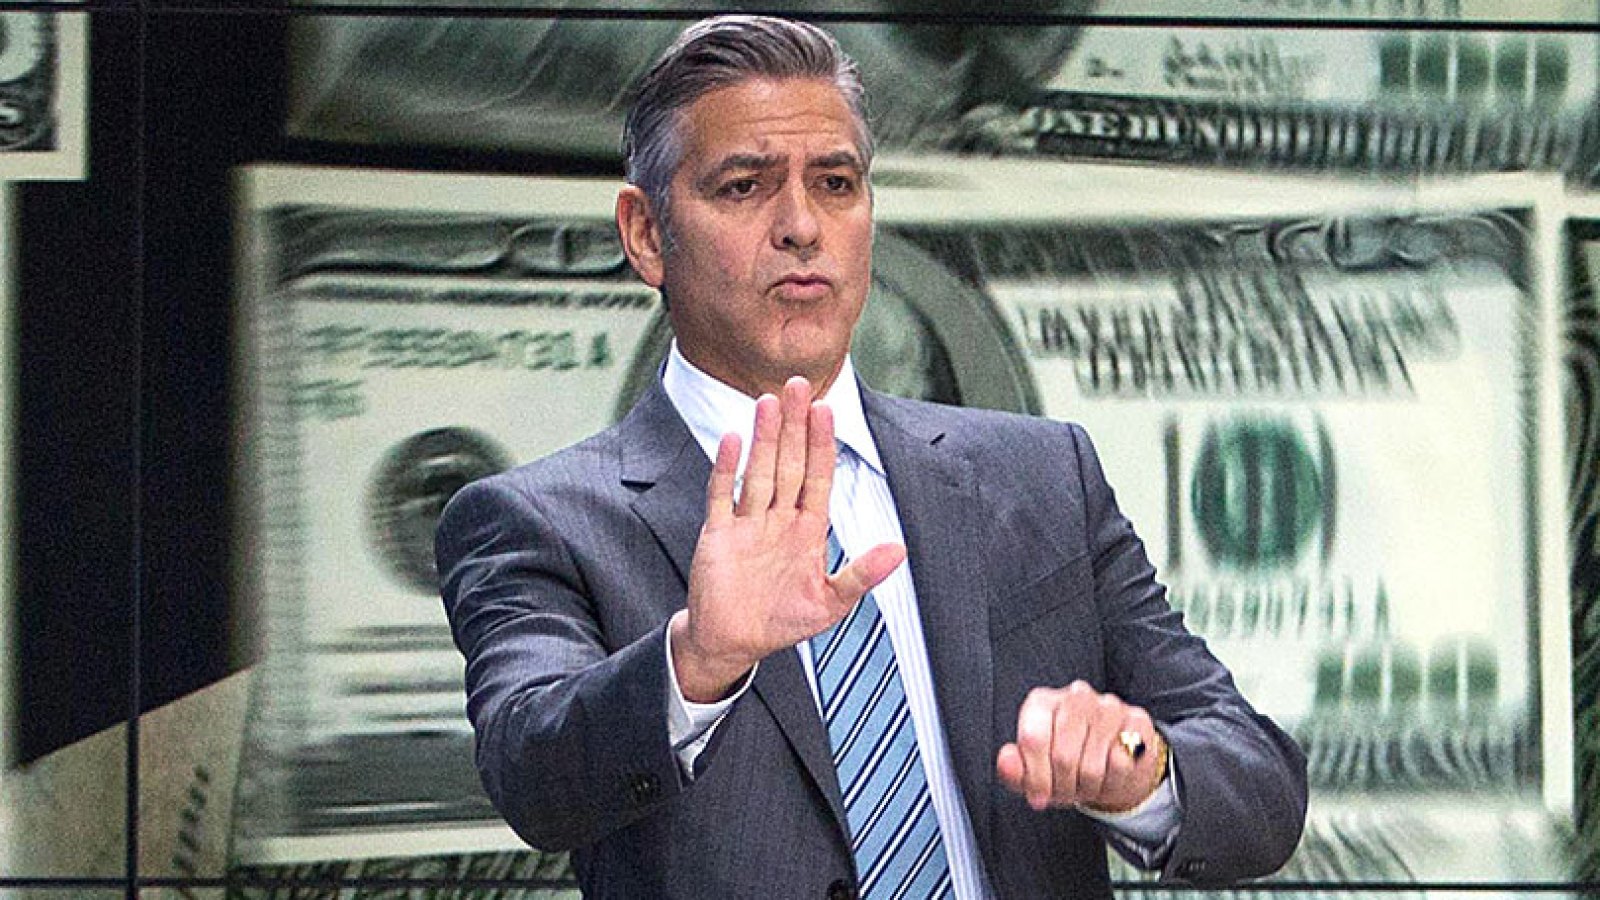 George Clooney (center) stars as Lee Gates in TriStar Pictures' MONEY MONSTER